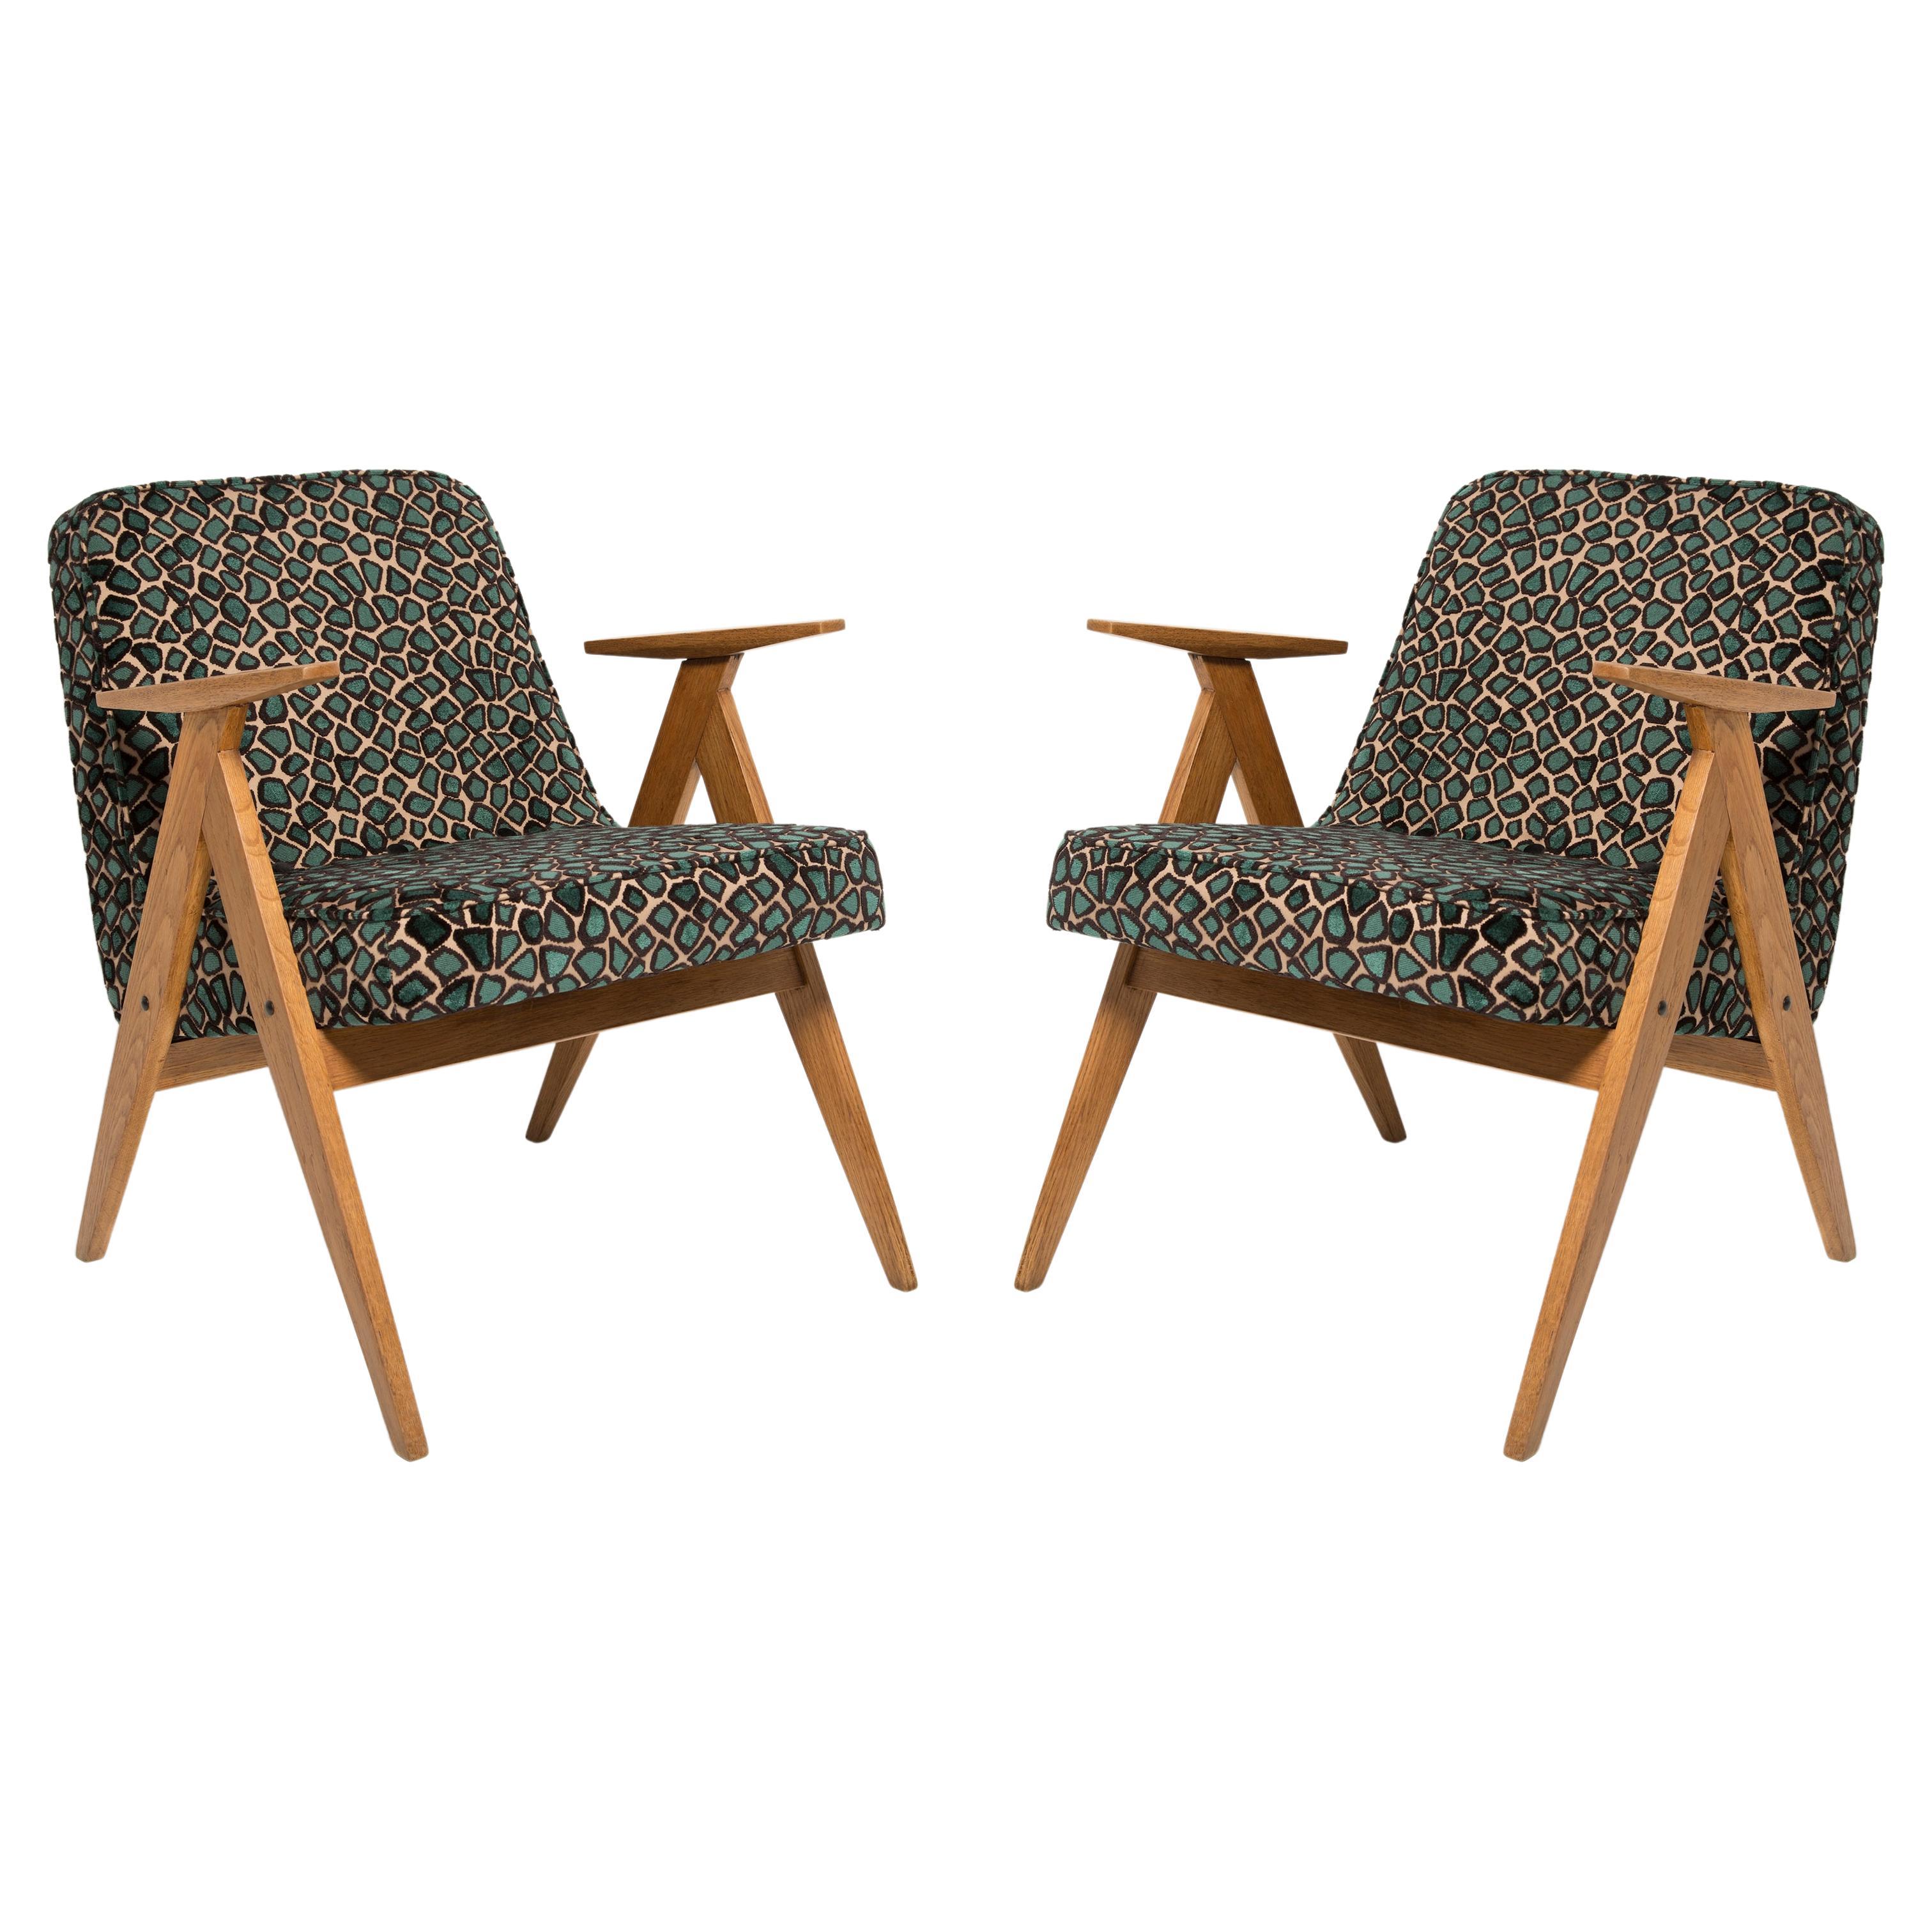 Two Mid Century 366 Armchairs in Leopard Velvet, by Chierowski, Europe, 1960s For Sale